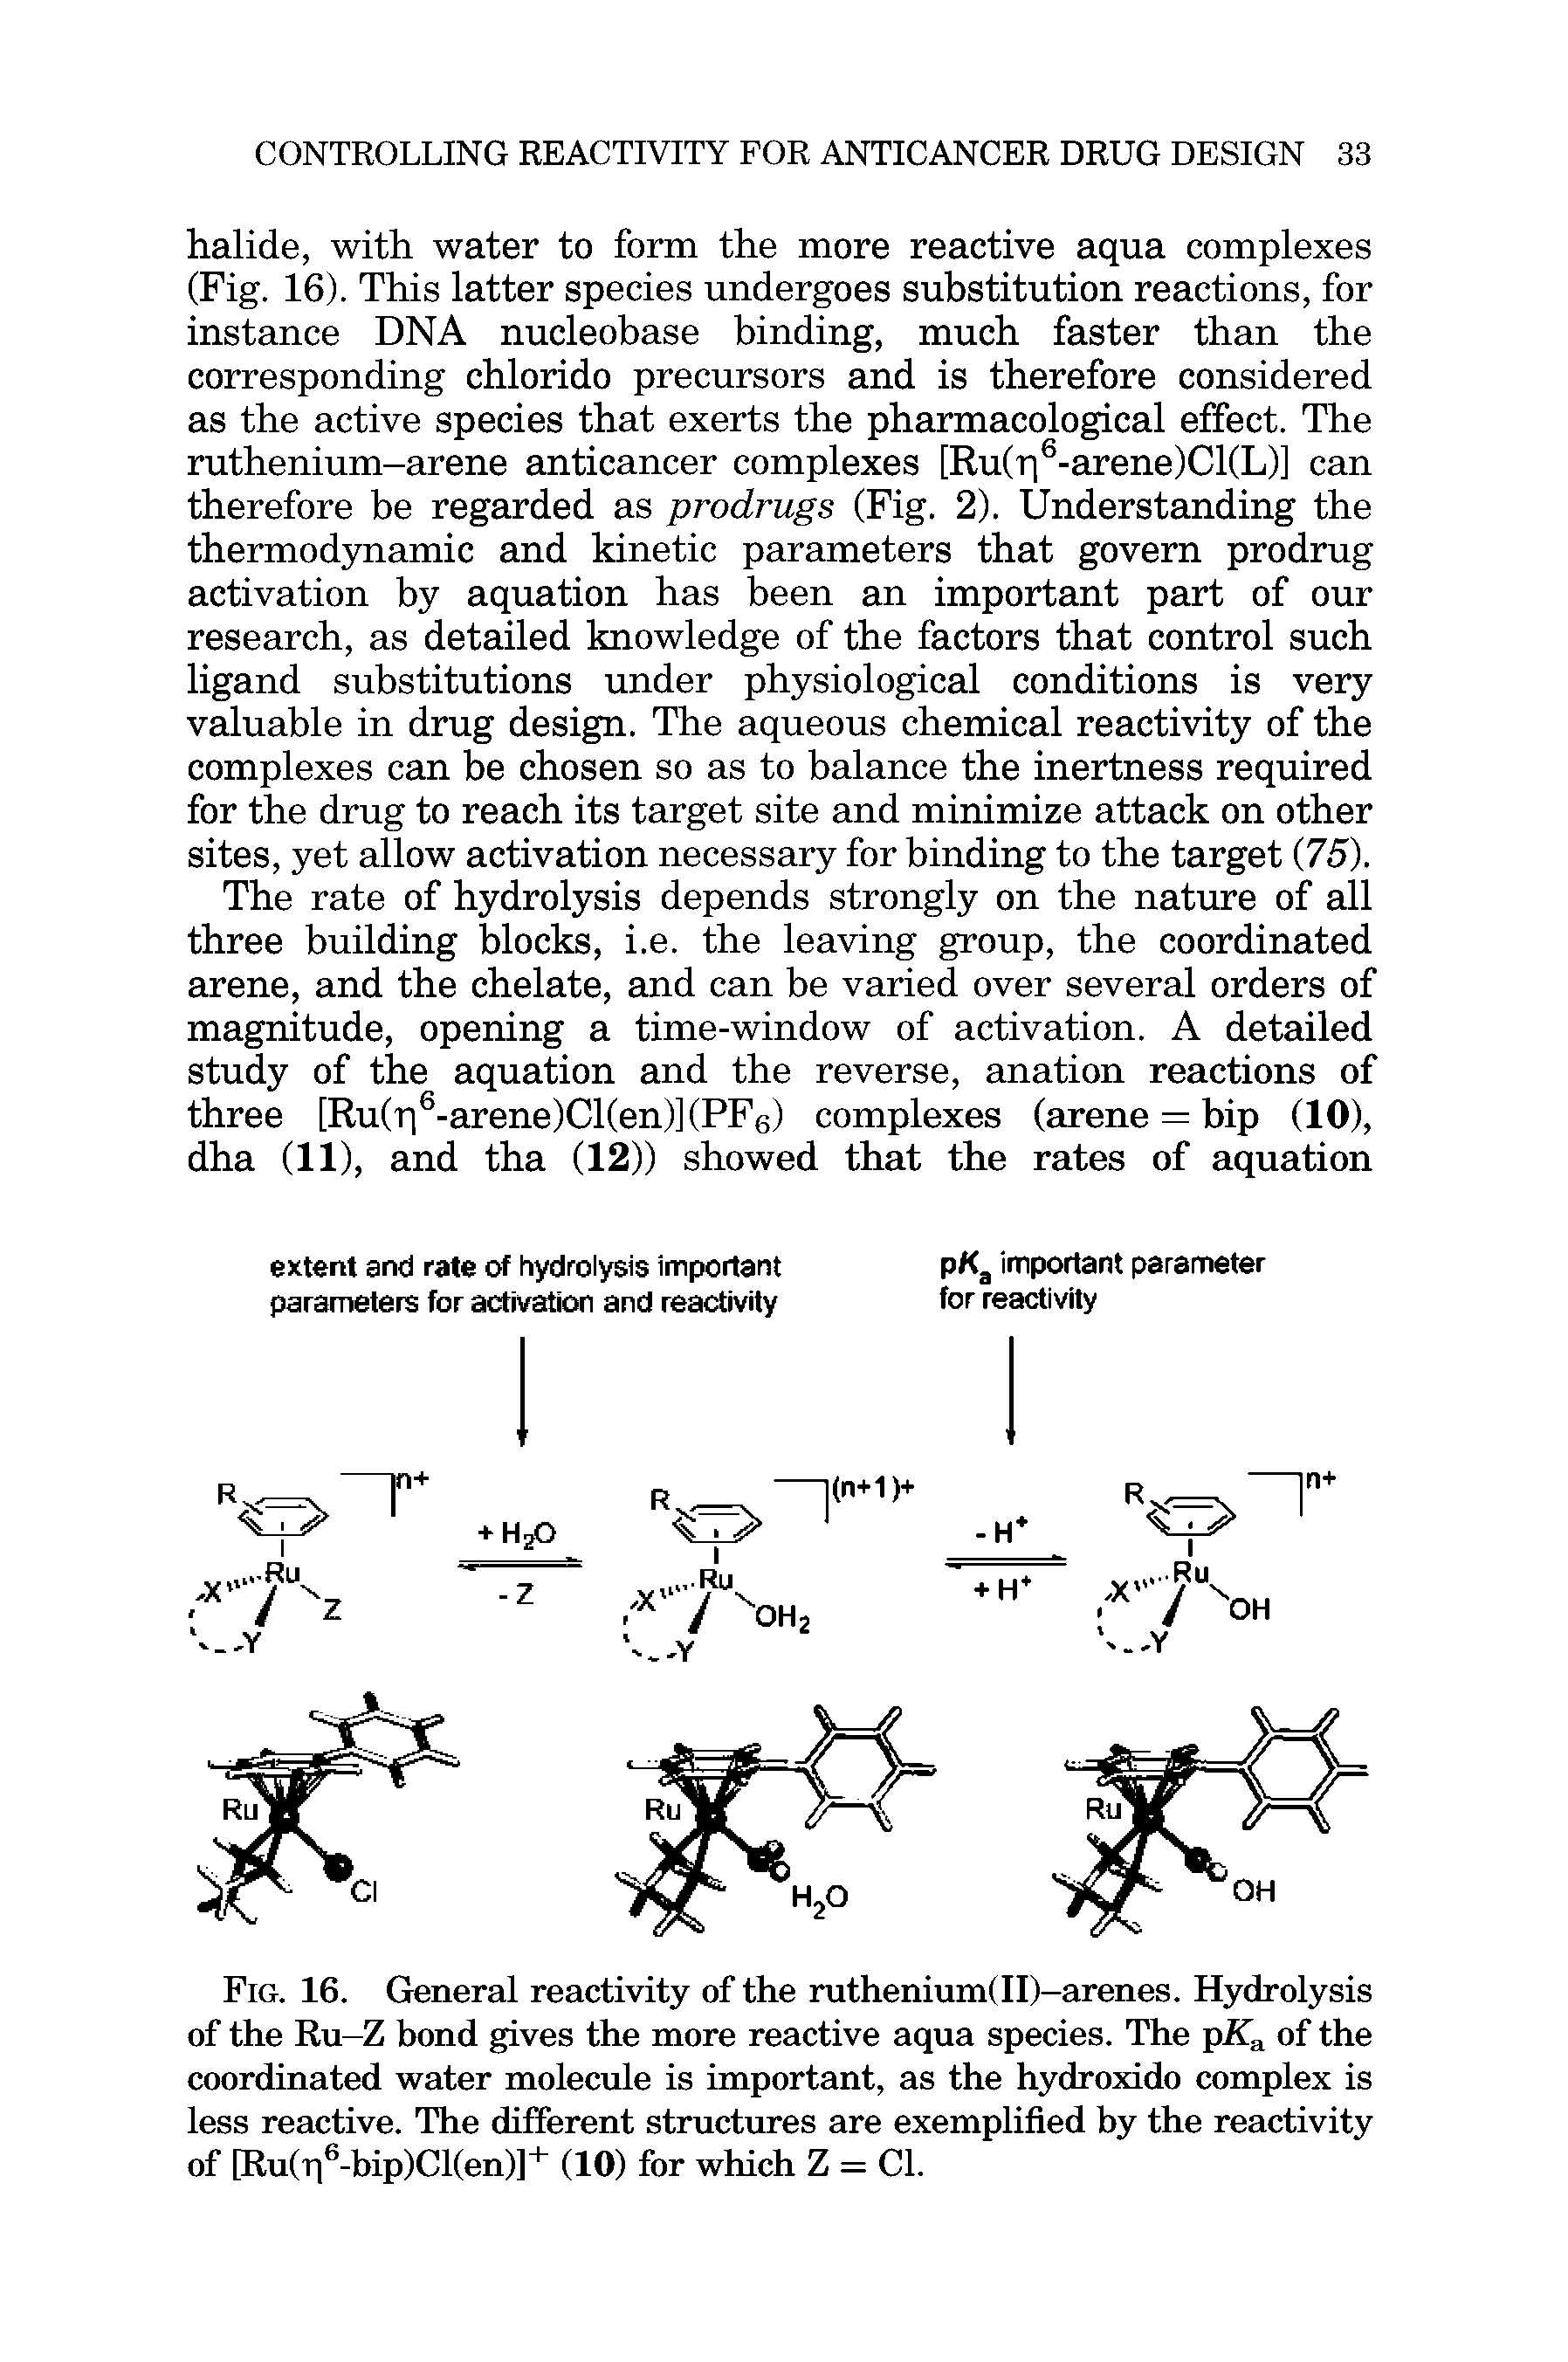 Fig. 16. General reactivity of the ruthenium(II)-arenes. Hydrolysis of the Ru—Z bond gives the more reactive aqua species. The pKa of the coordinated water molecule is important, as the hydroxido complex is less reactive. The different structures are exemplified by the reactivity of [Ru(ri6-bip)Cl(en)]+ (10) for which Z = Cl.